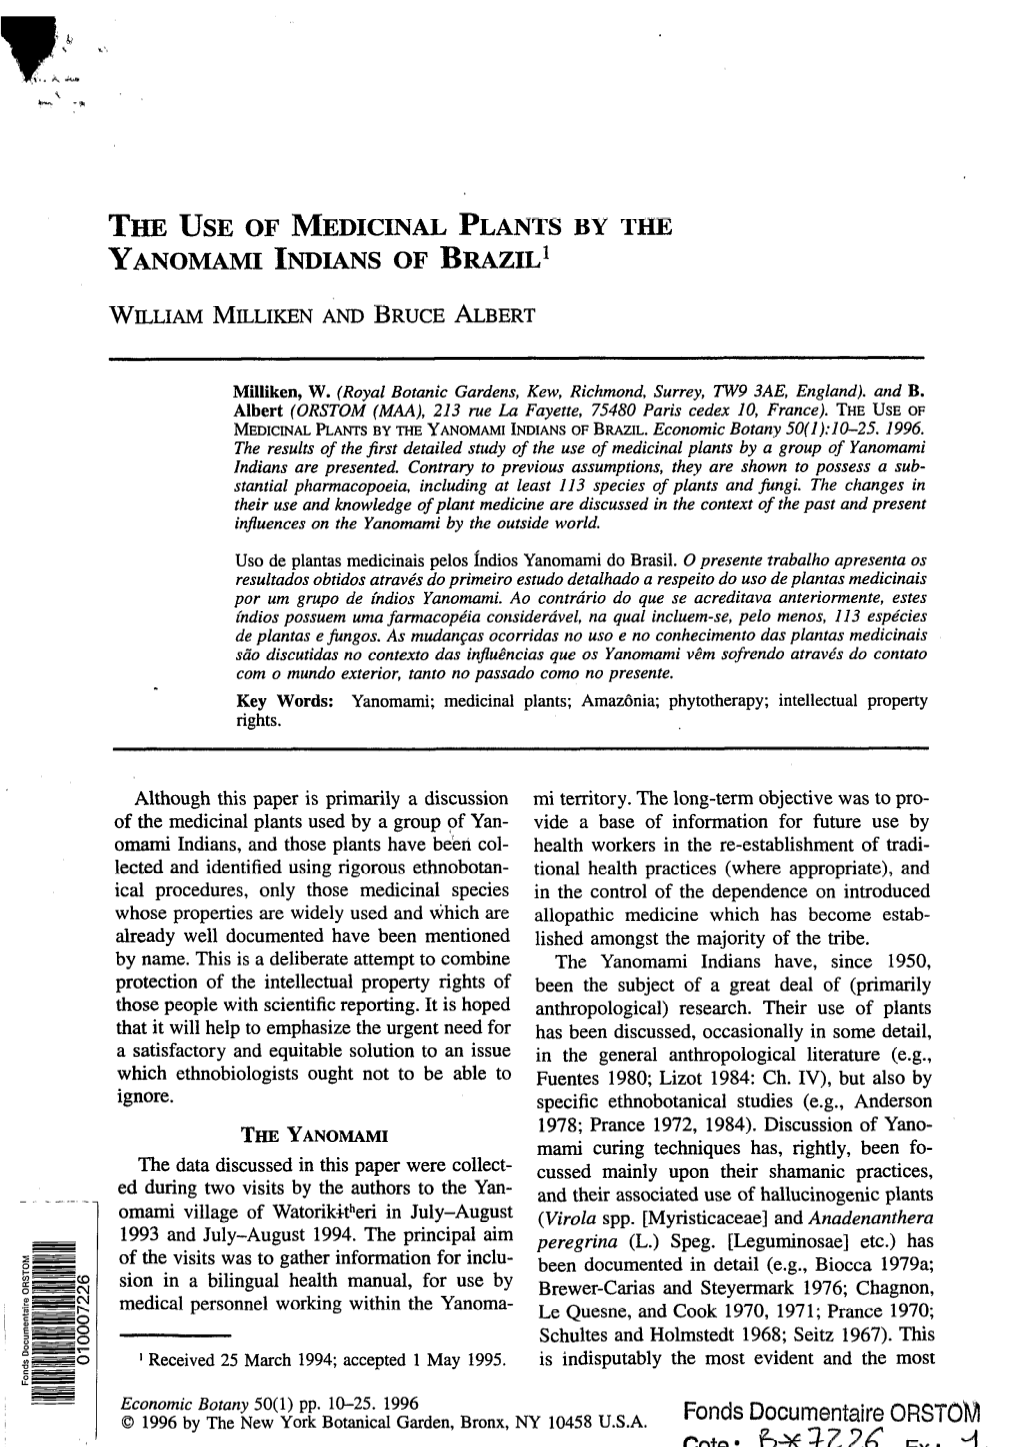 The Use of Medicinal Plants by the Yanomami Indians of Brazil~